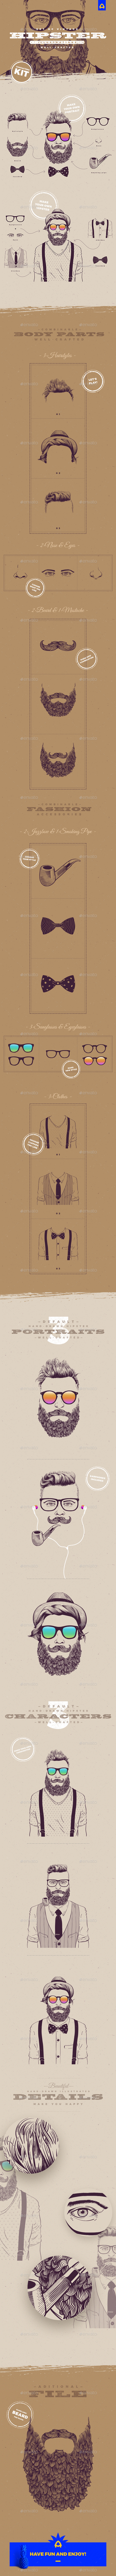 GraphicRiver Hipster Characters Kit 20629272